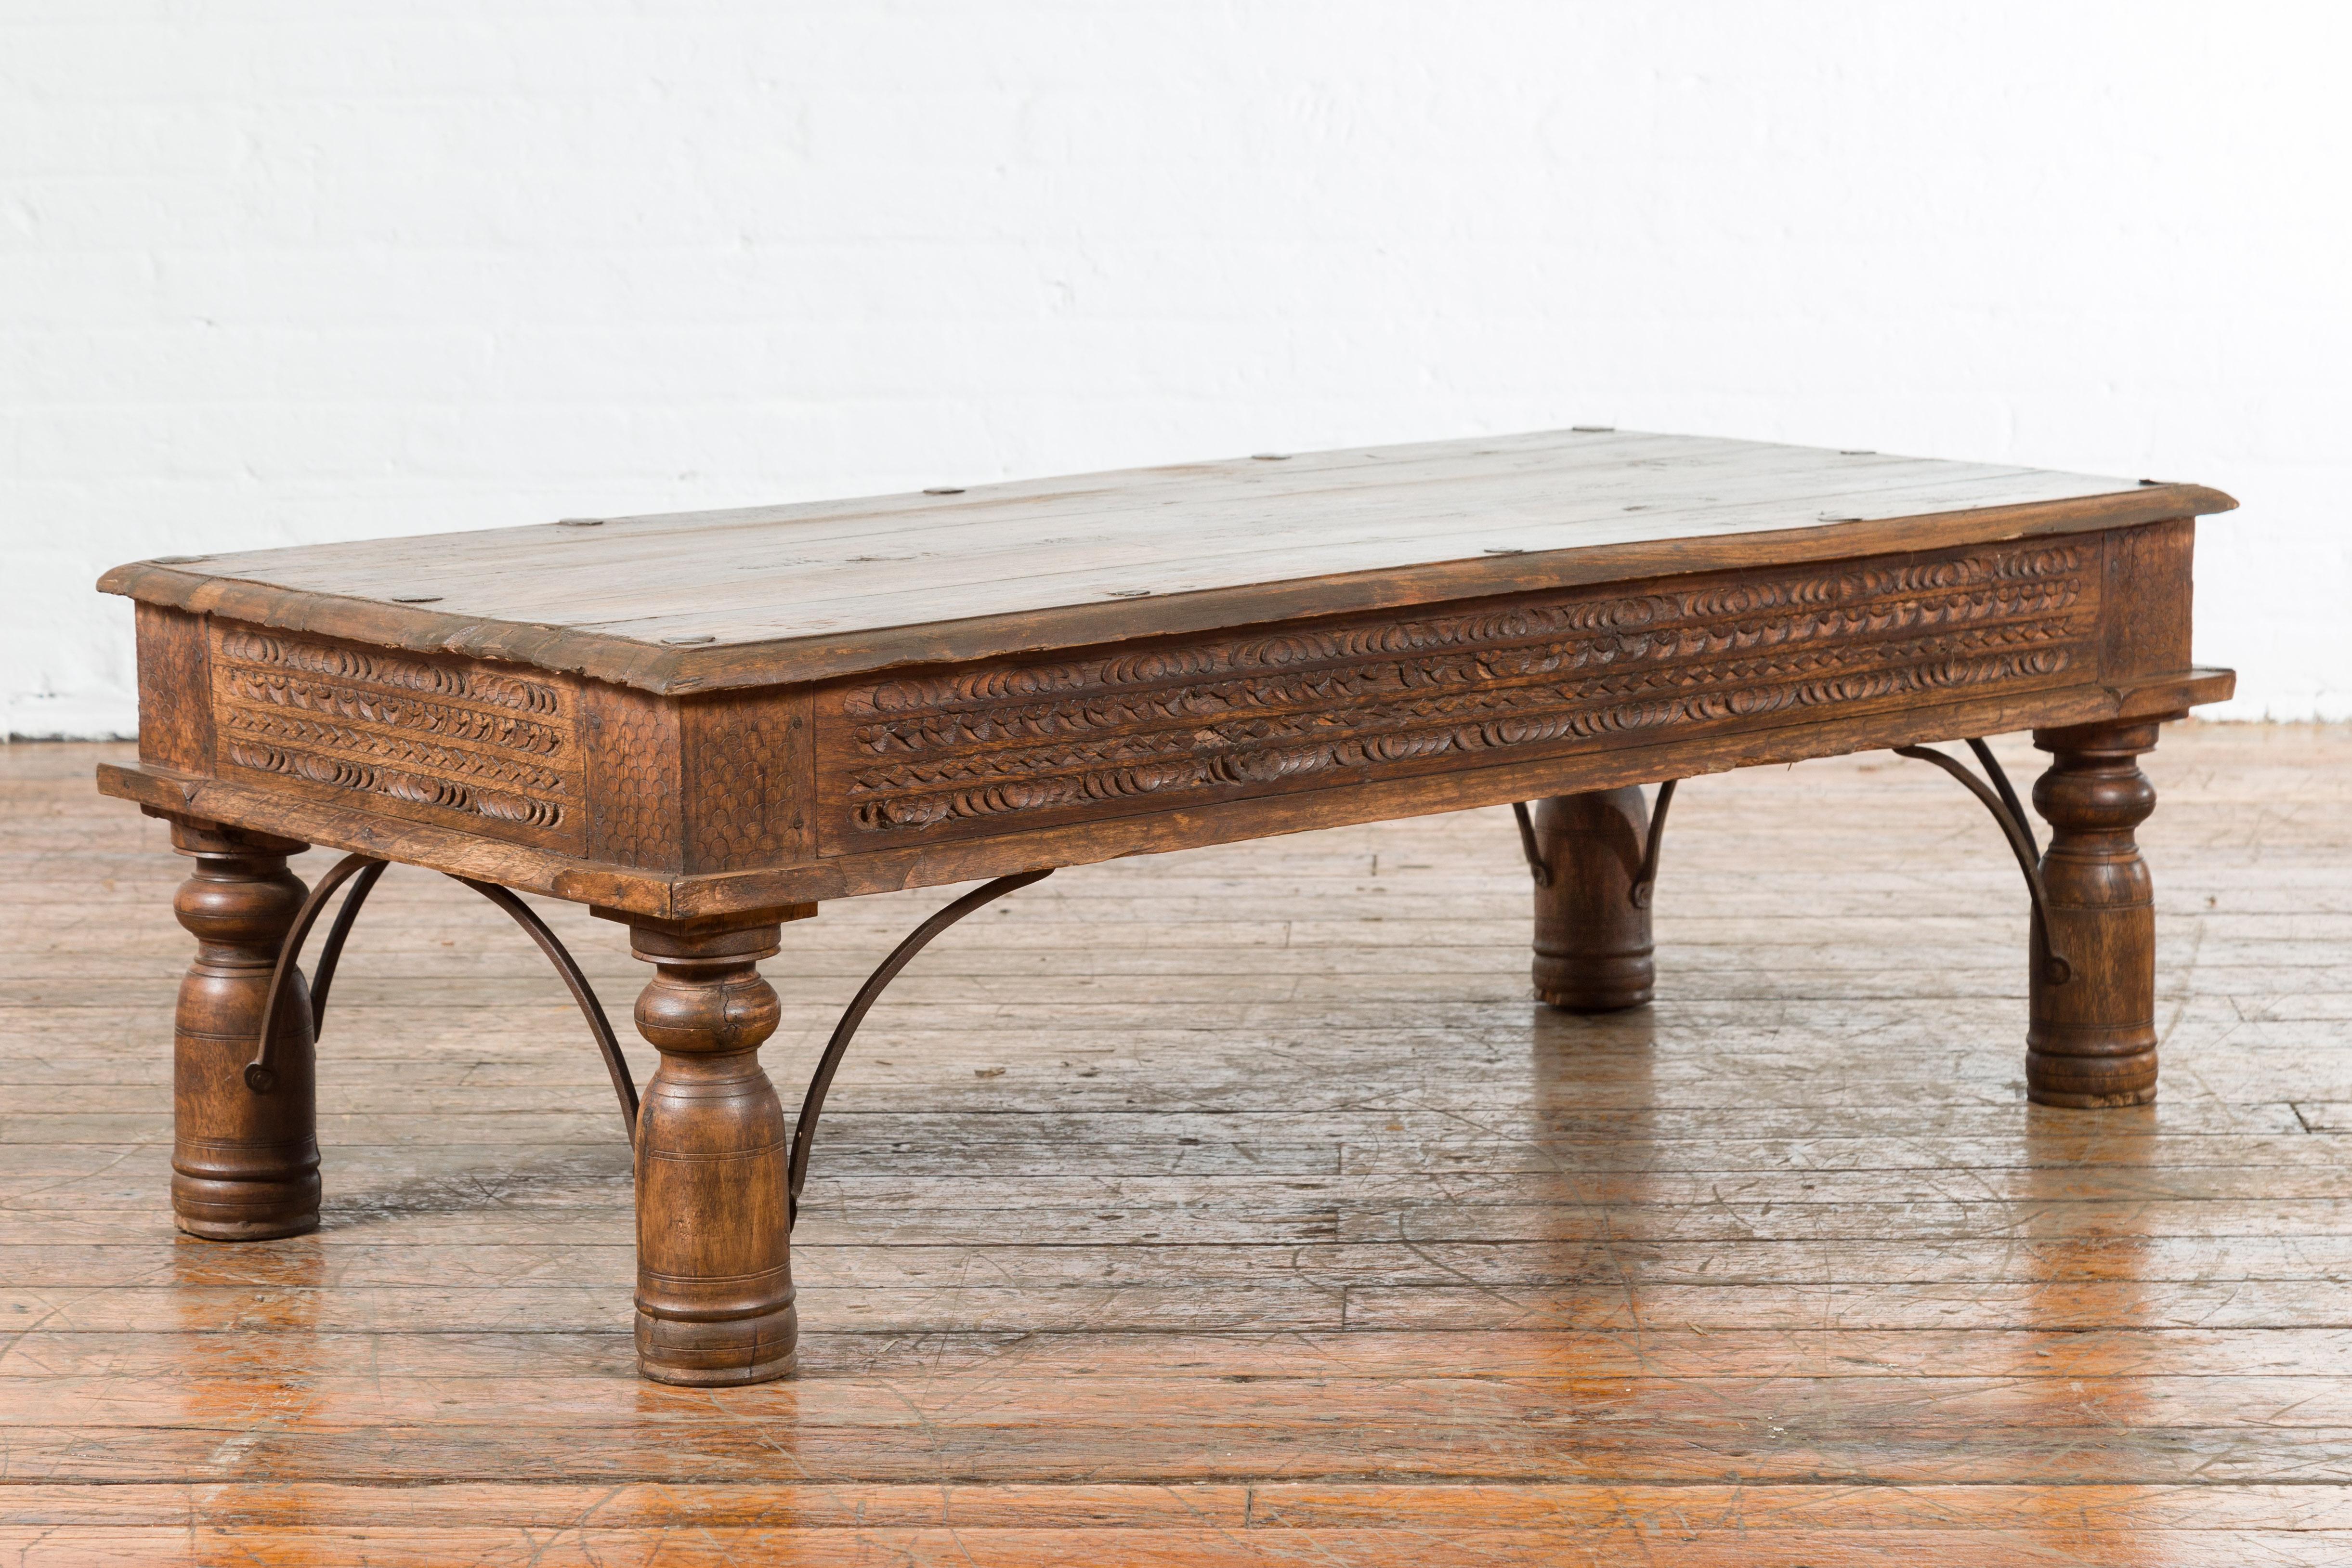 19th Century Indian Rustic Coffee Table with Carved Apron and Iron Accents 5